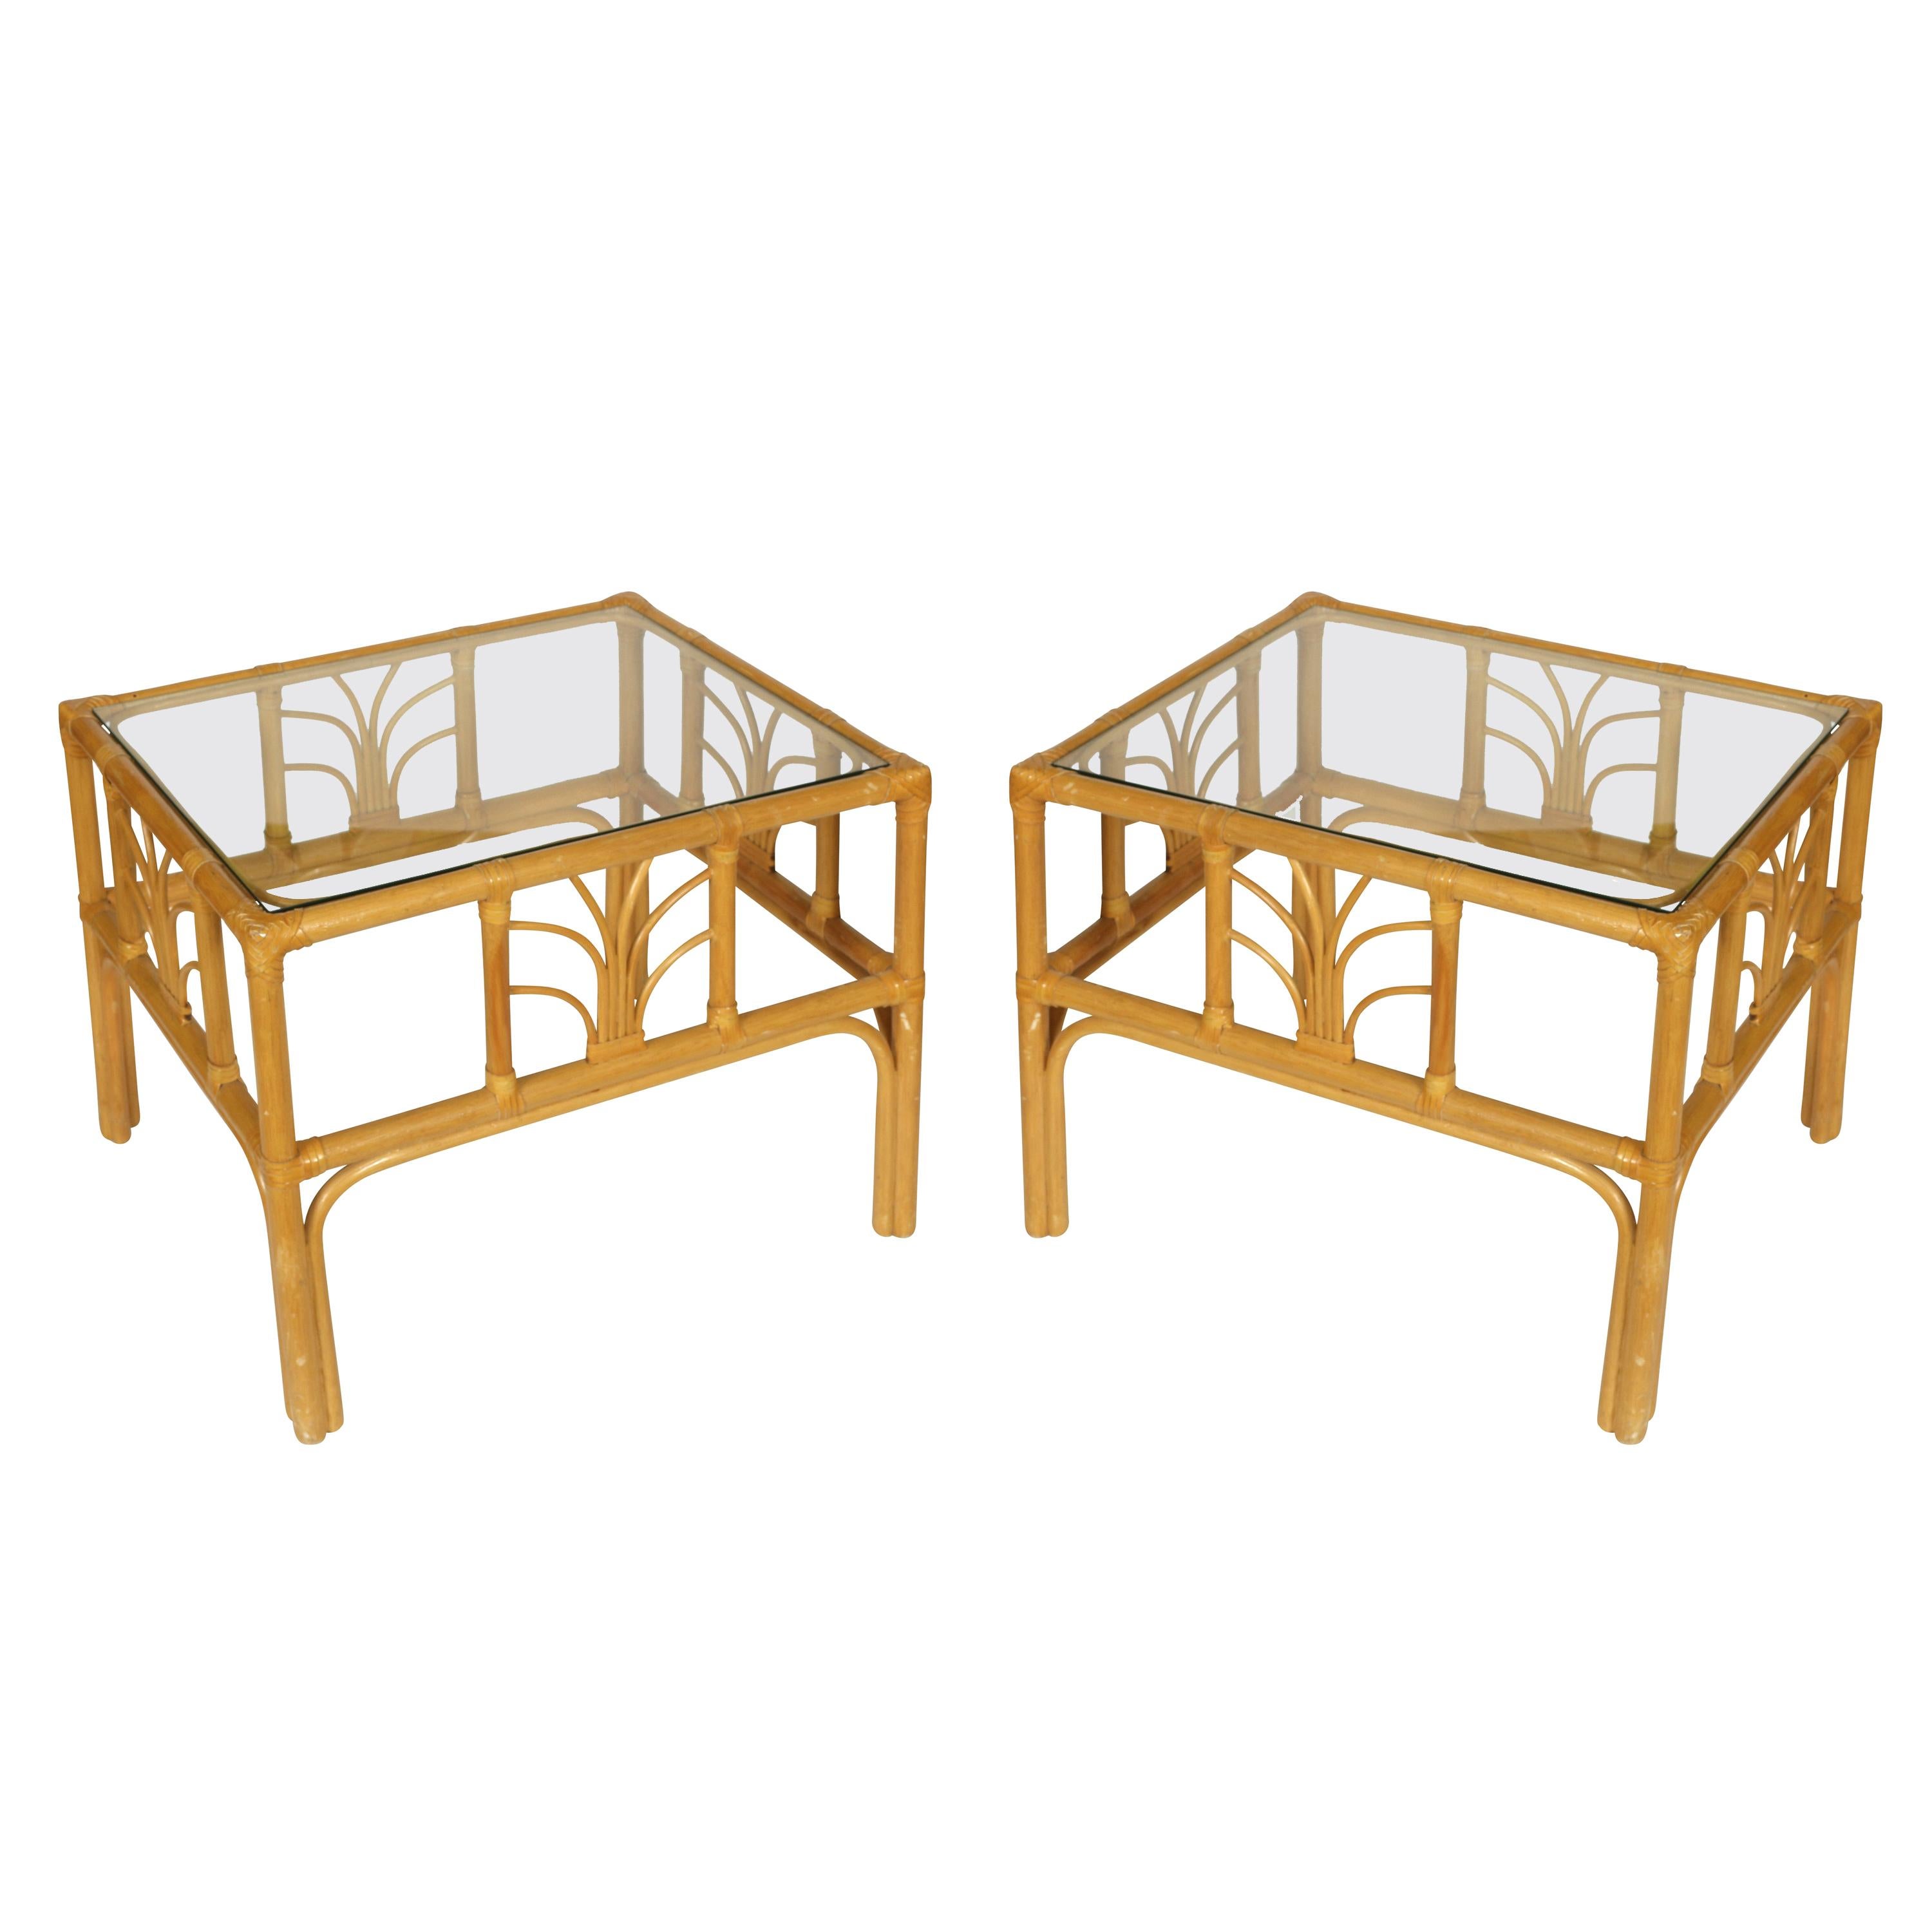 Pair of Faux Bamboo Side Tables